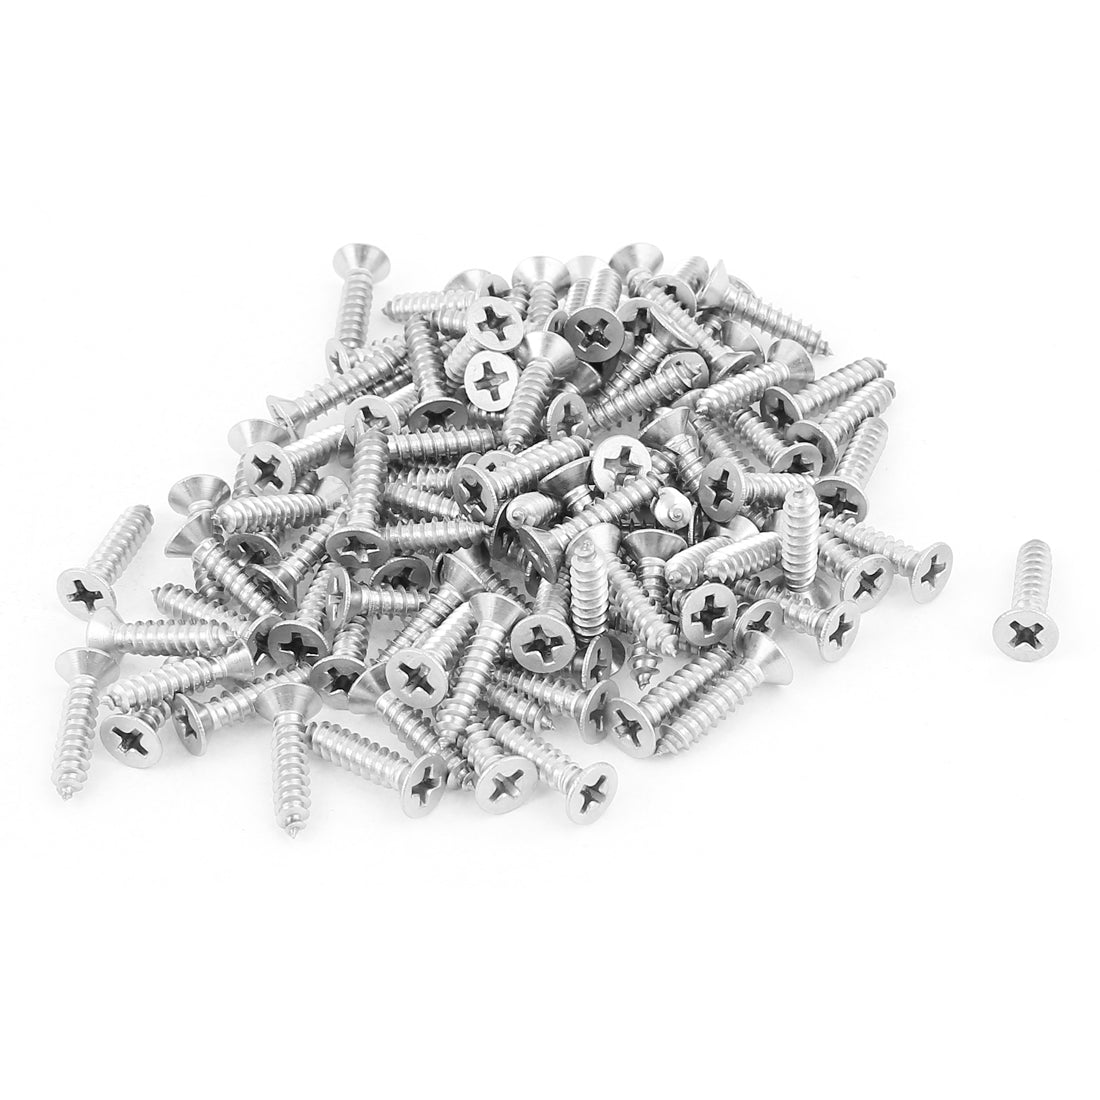 uxcell Uxcell M4x18mm Phillips Flat Head Stainless Steel Self Tapping Screws Fastener 100Pcs